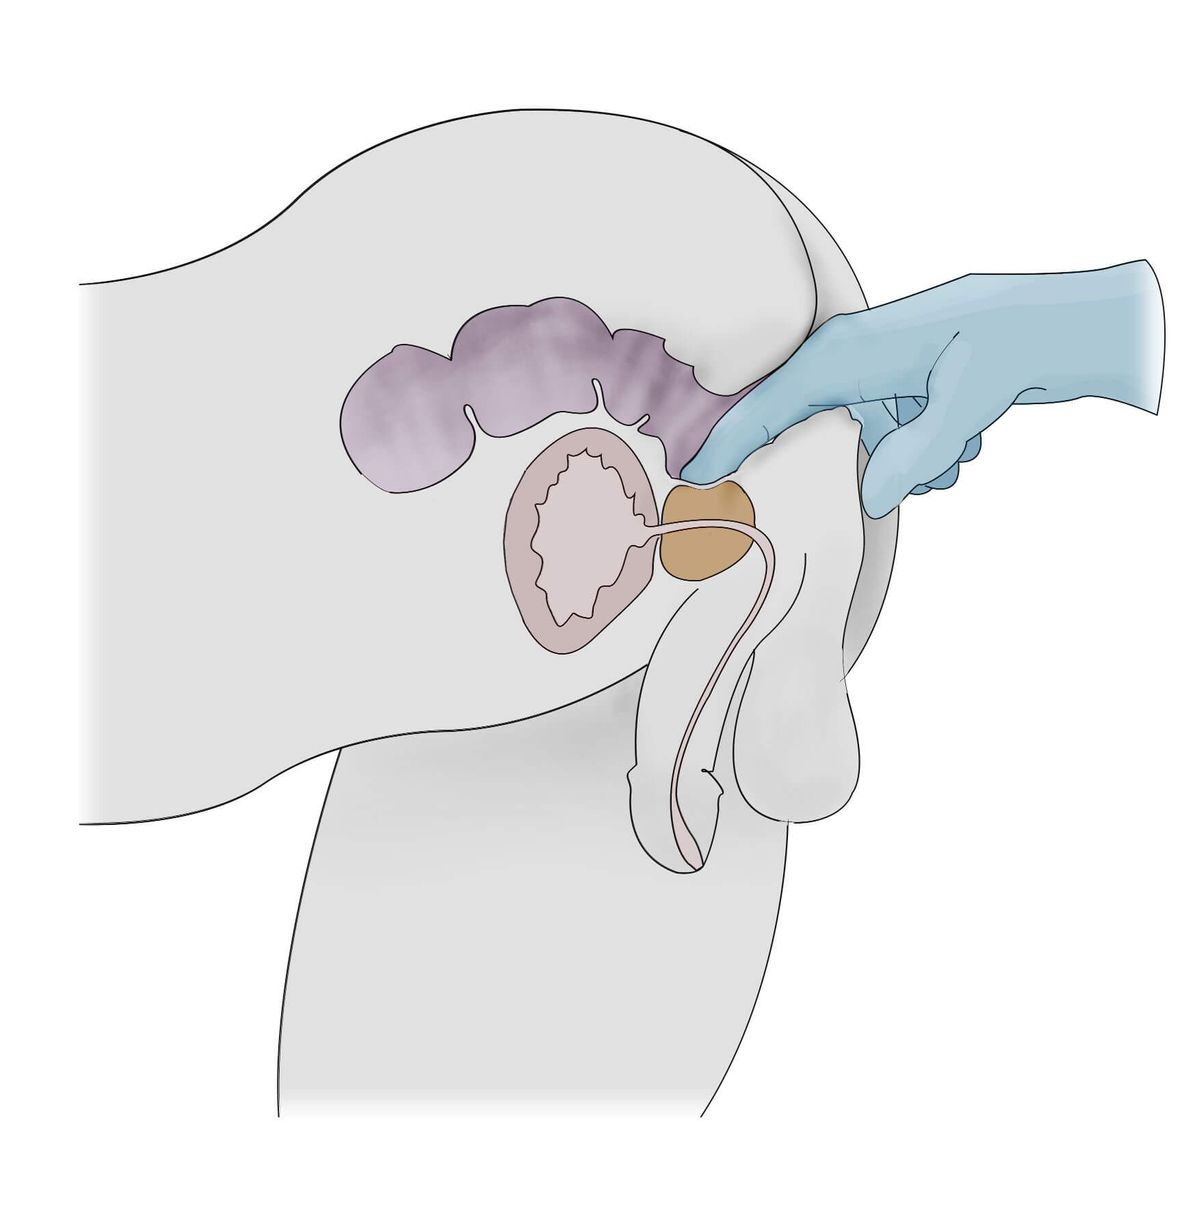 A drawing showing how the prostate is located during prostate examination